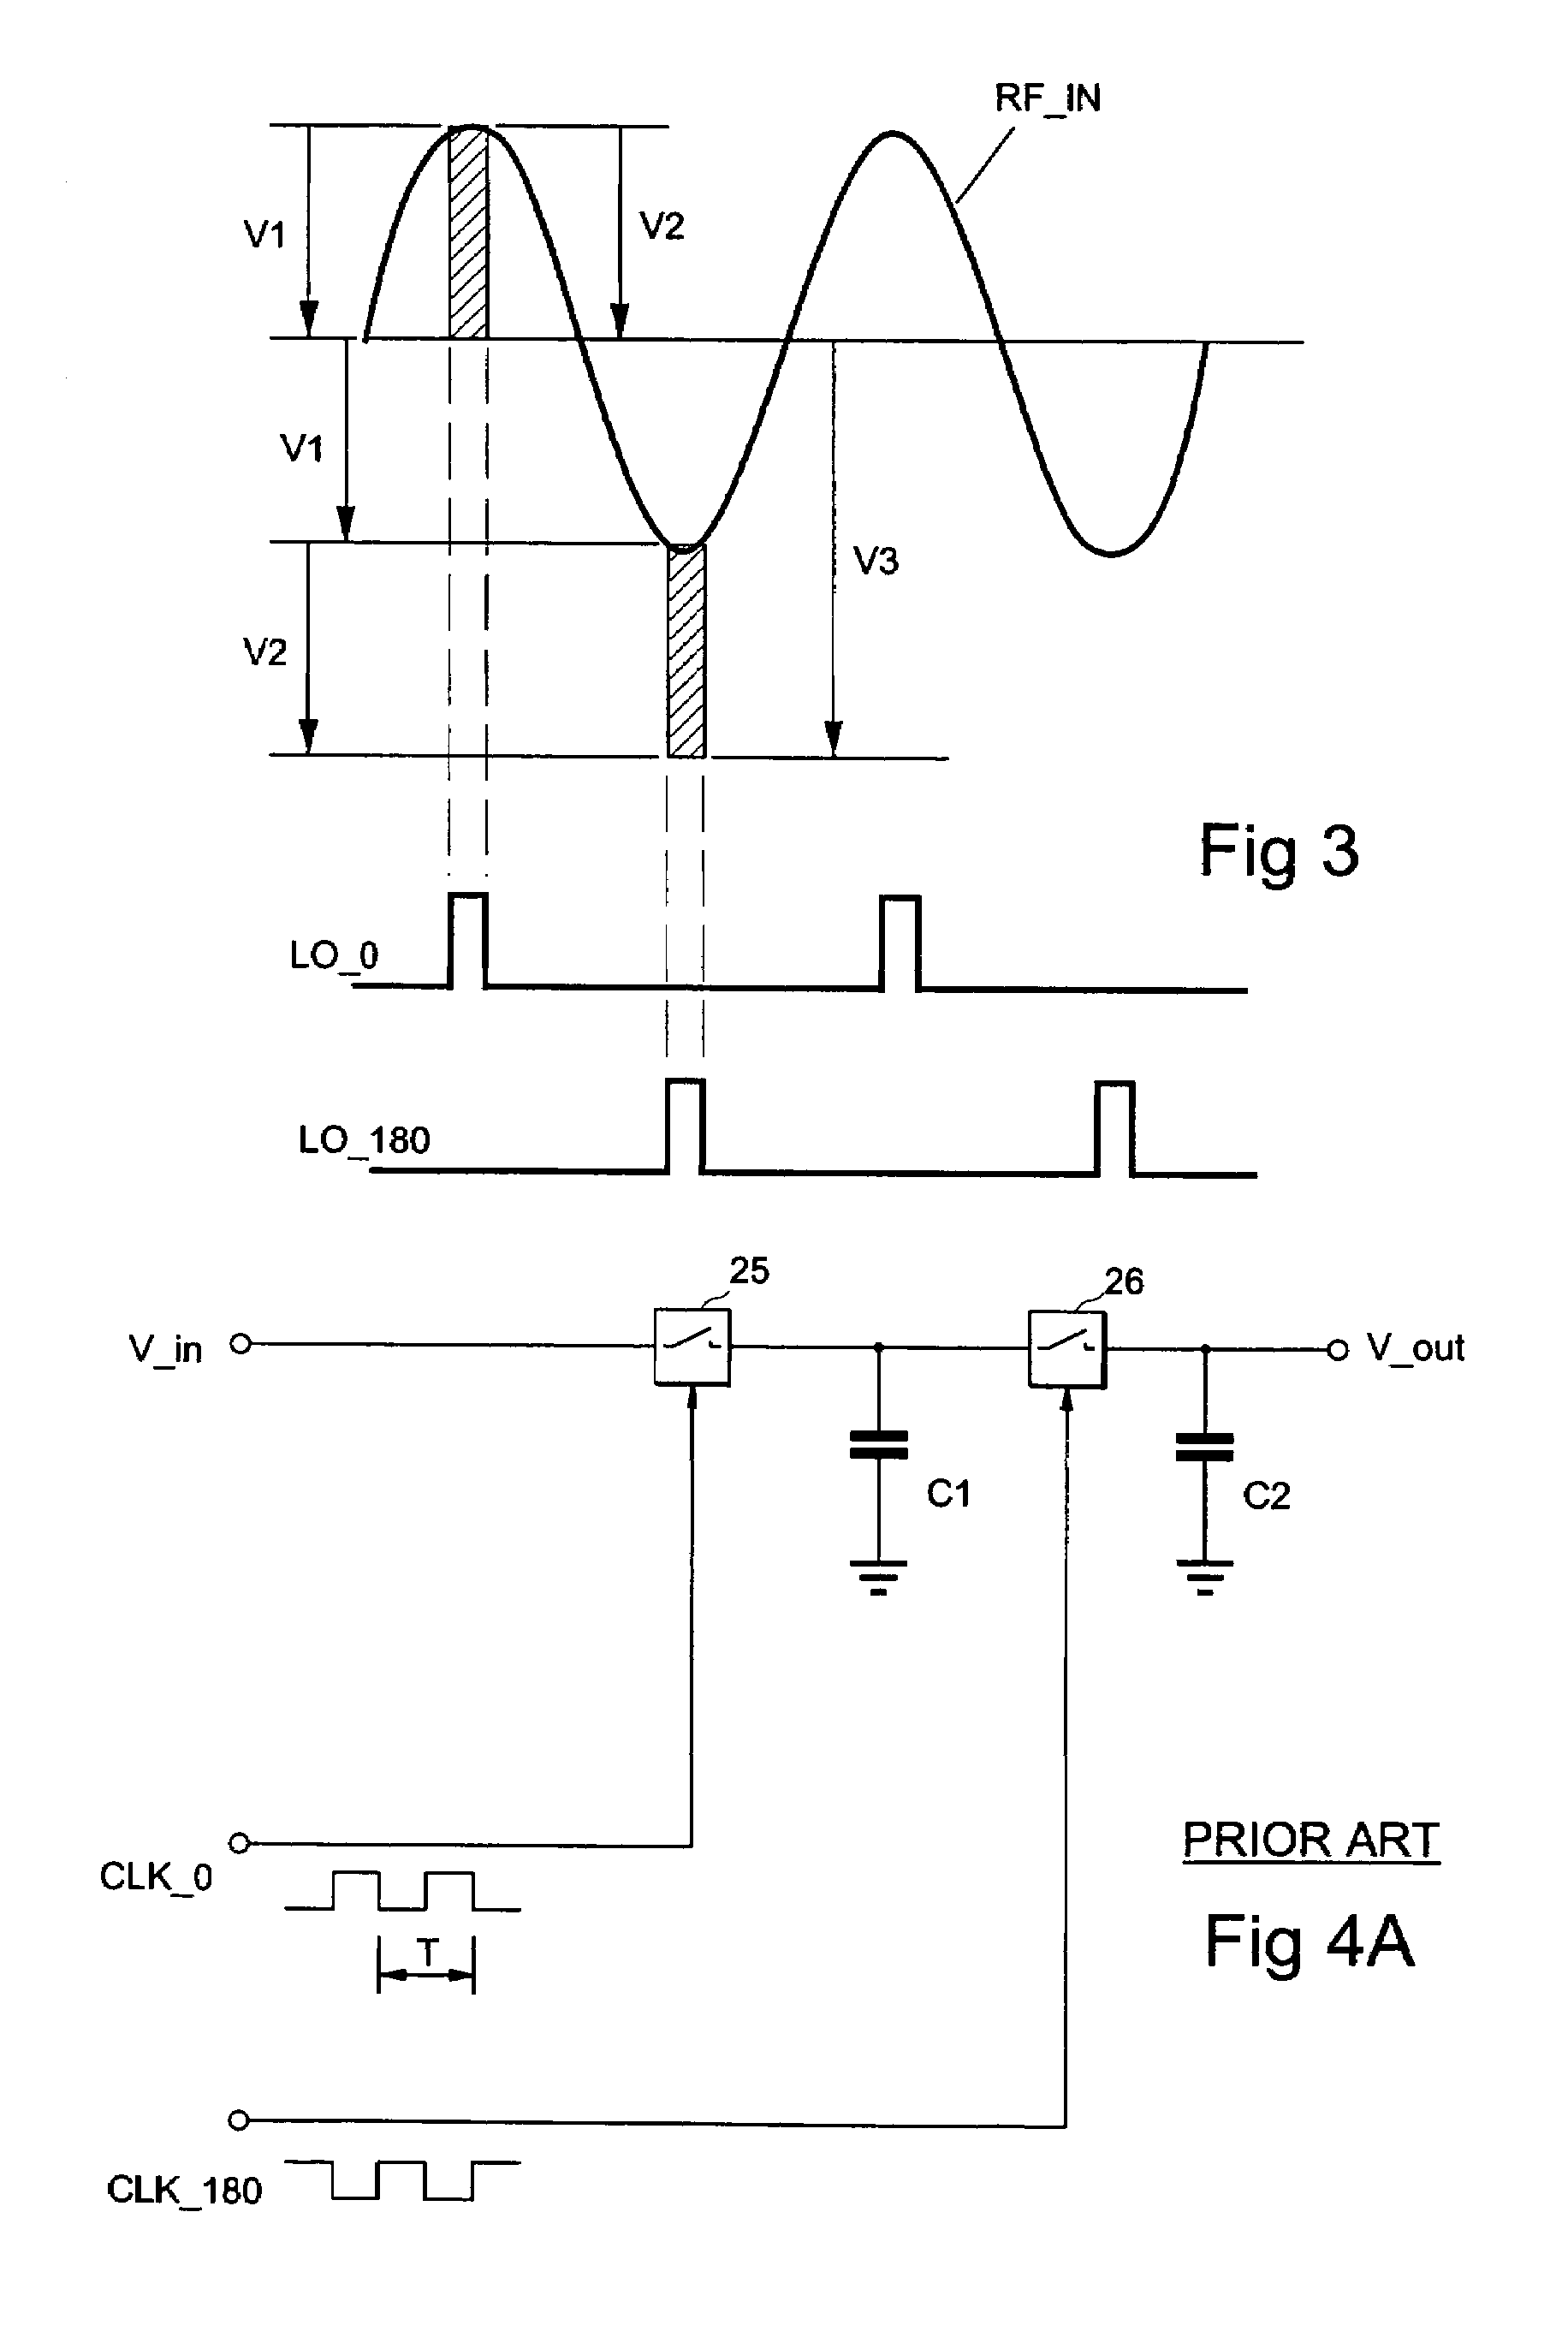 Multi-function passive frequency mixer